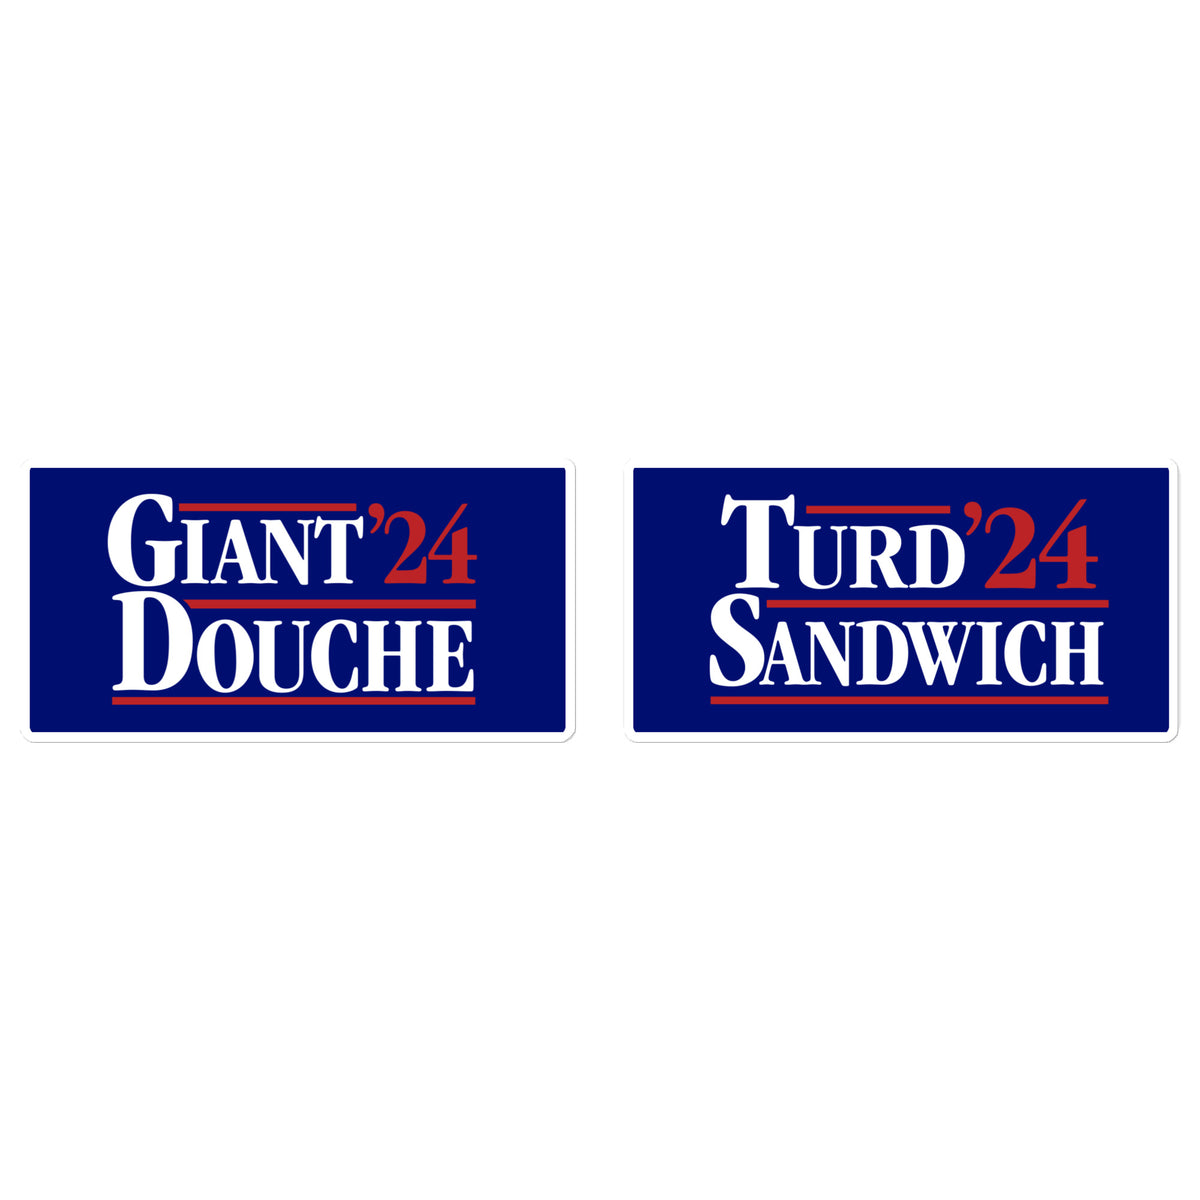 Giant Douche and Turd Sandwich 2024 Bumper Stickers